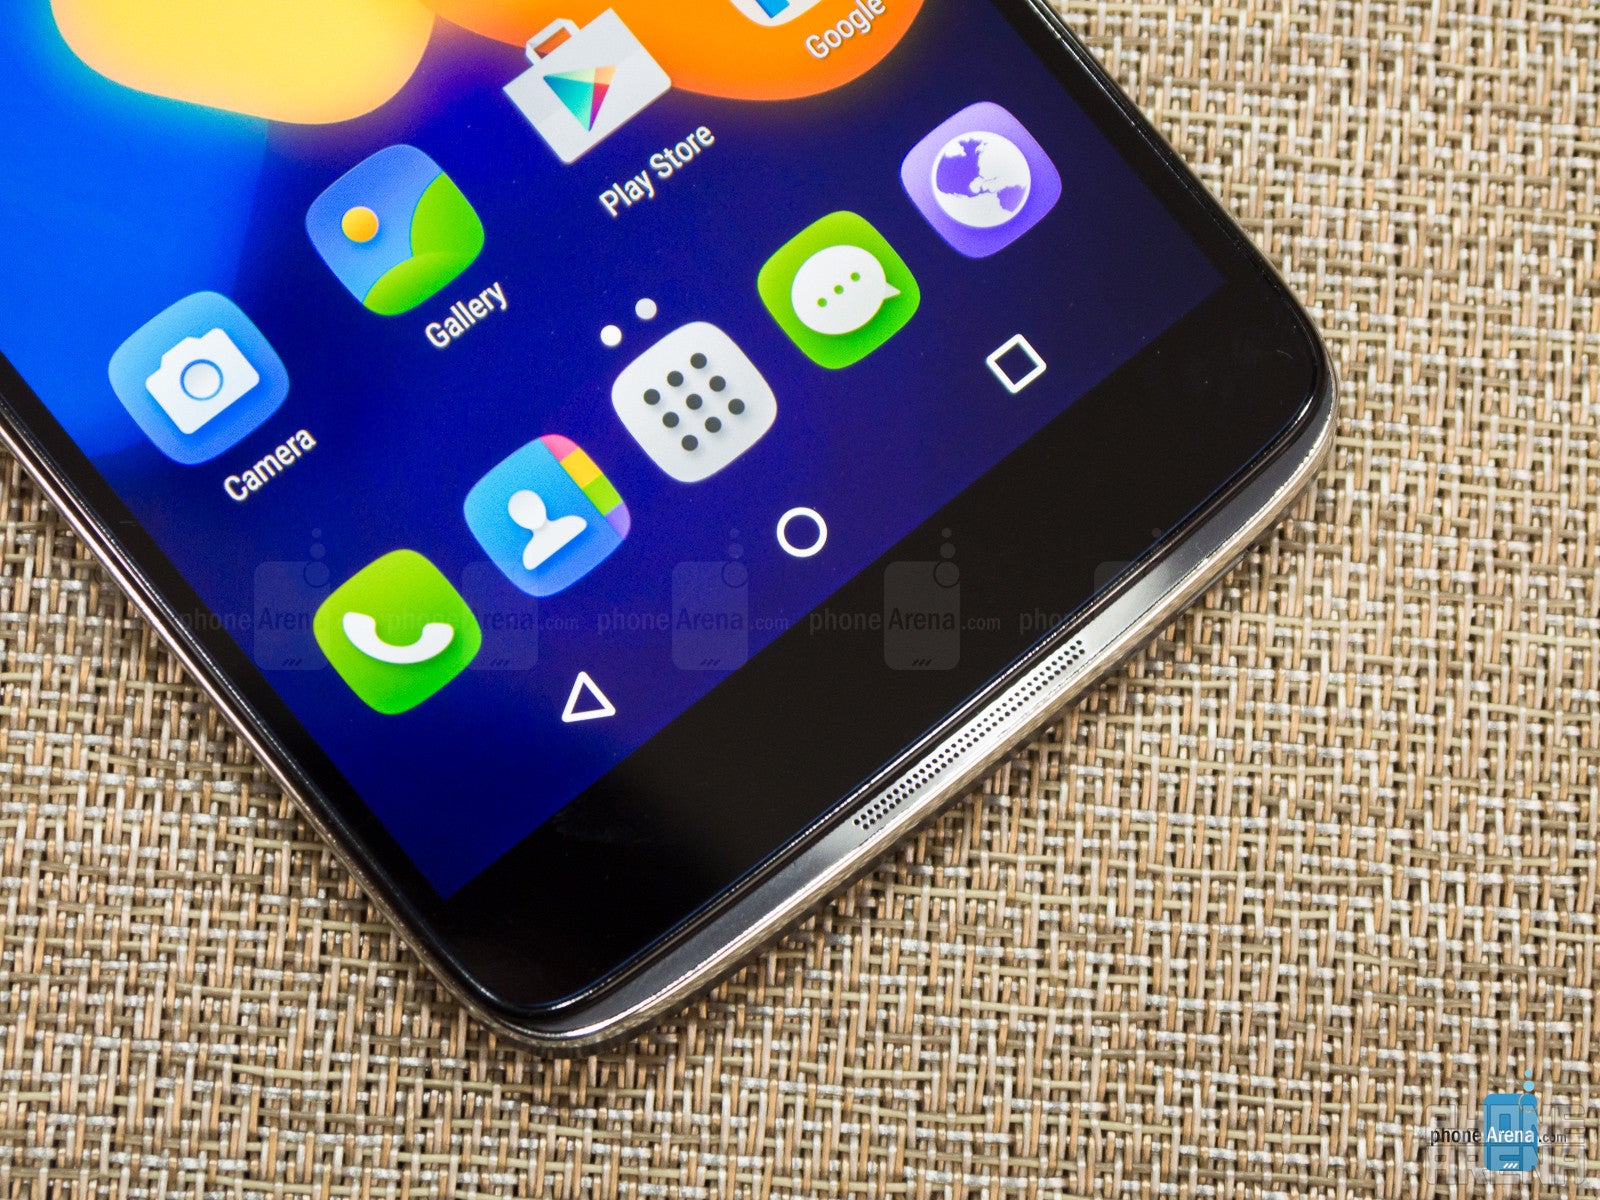 Alcatel OneTouch Idol 3 (5.5-inch) Review